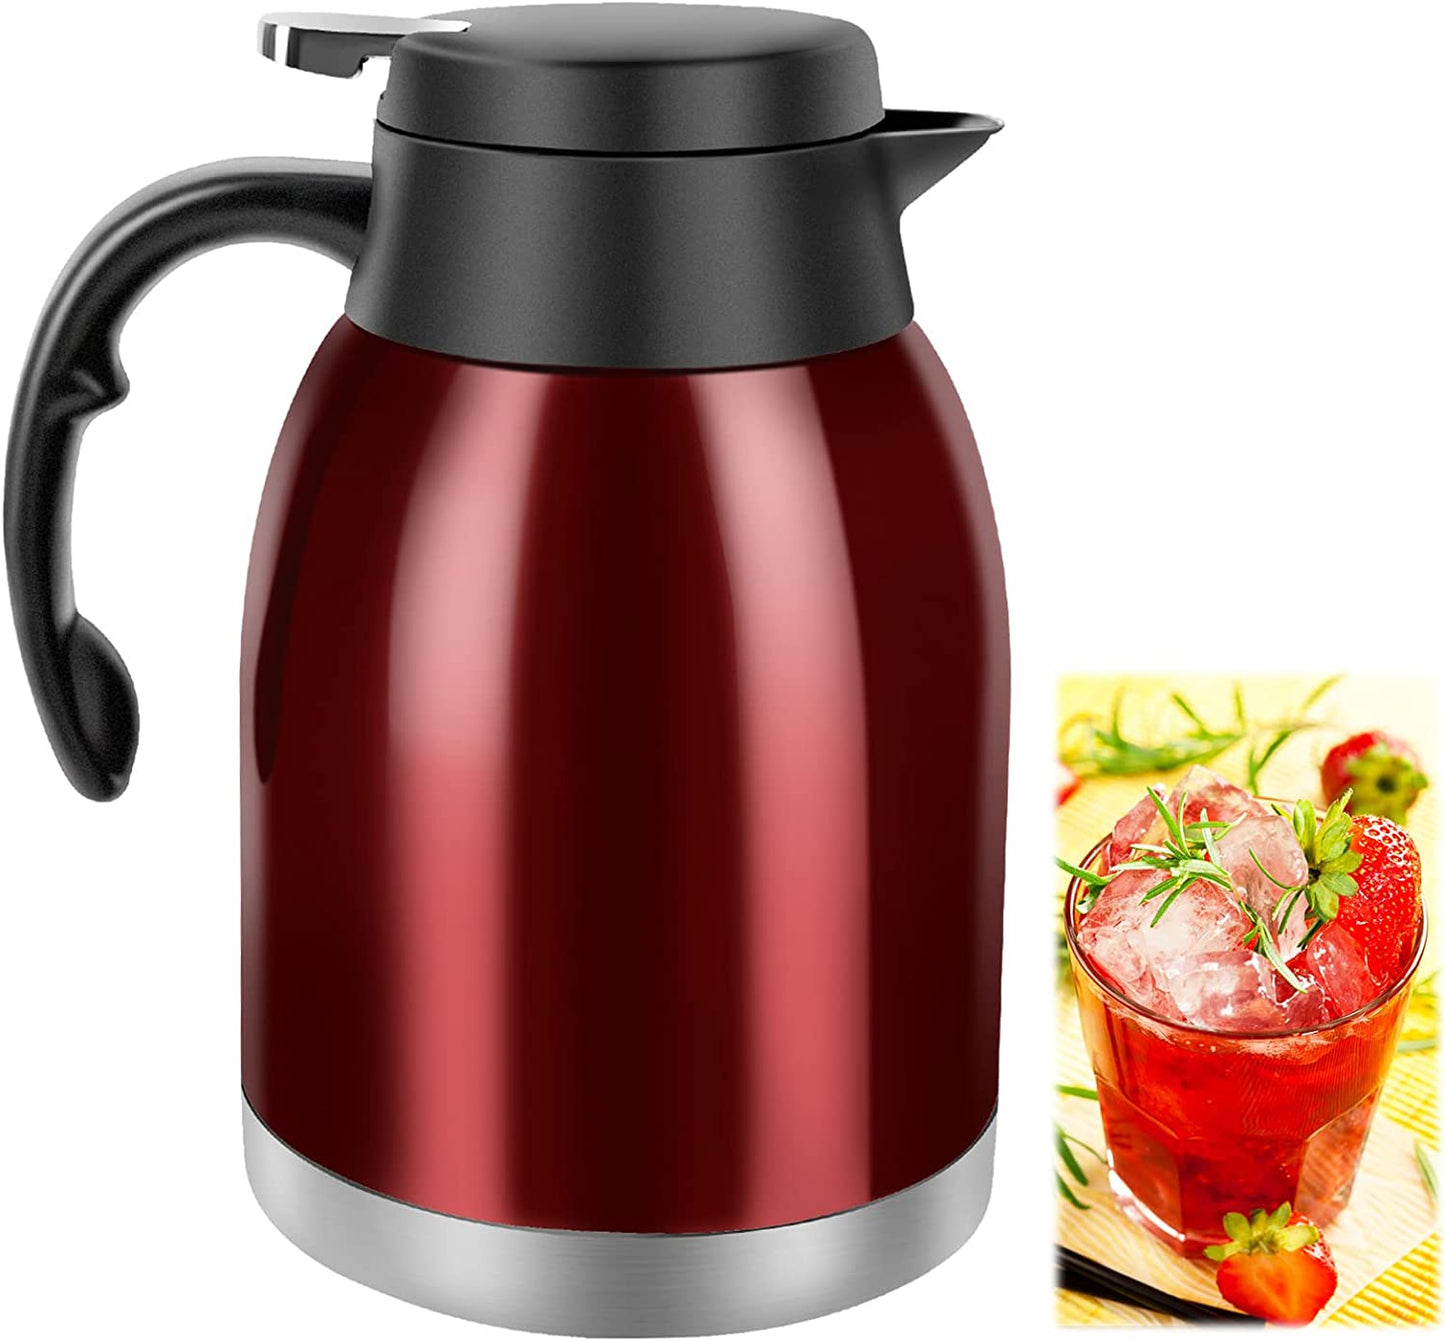 THERMOS Thermal Beverage Dispenser - Thermos Coffee Carafe for